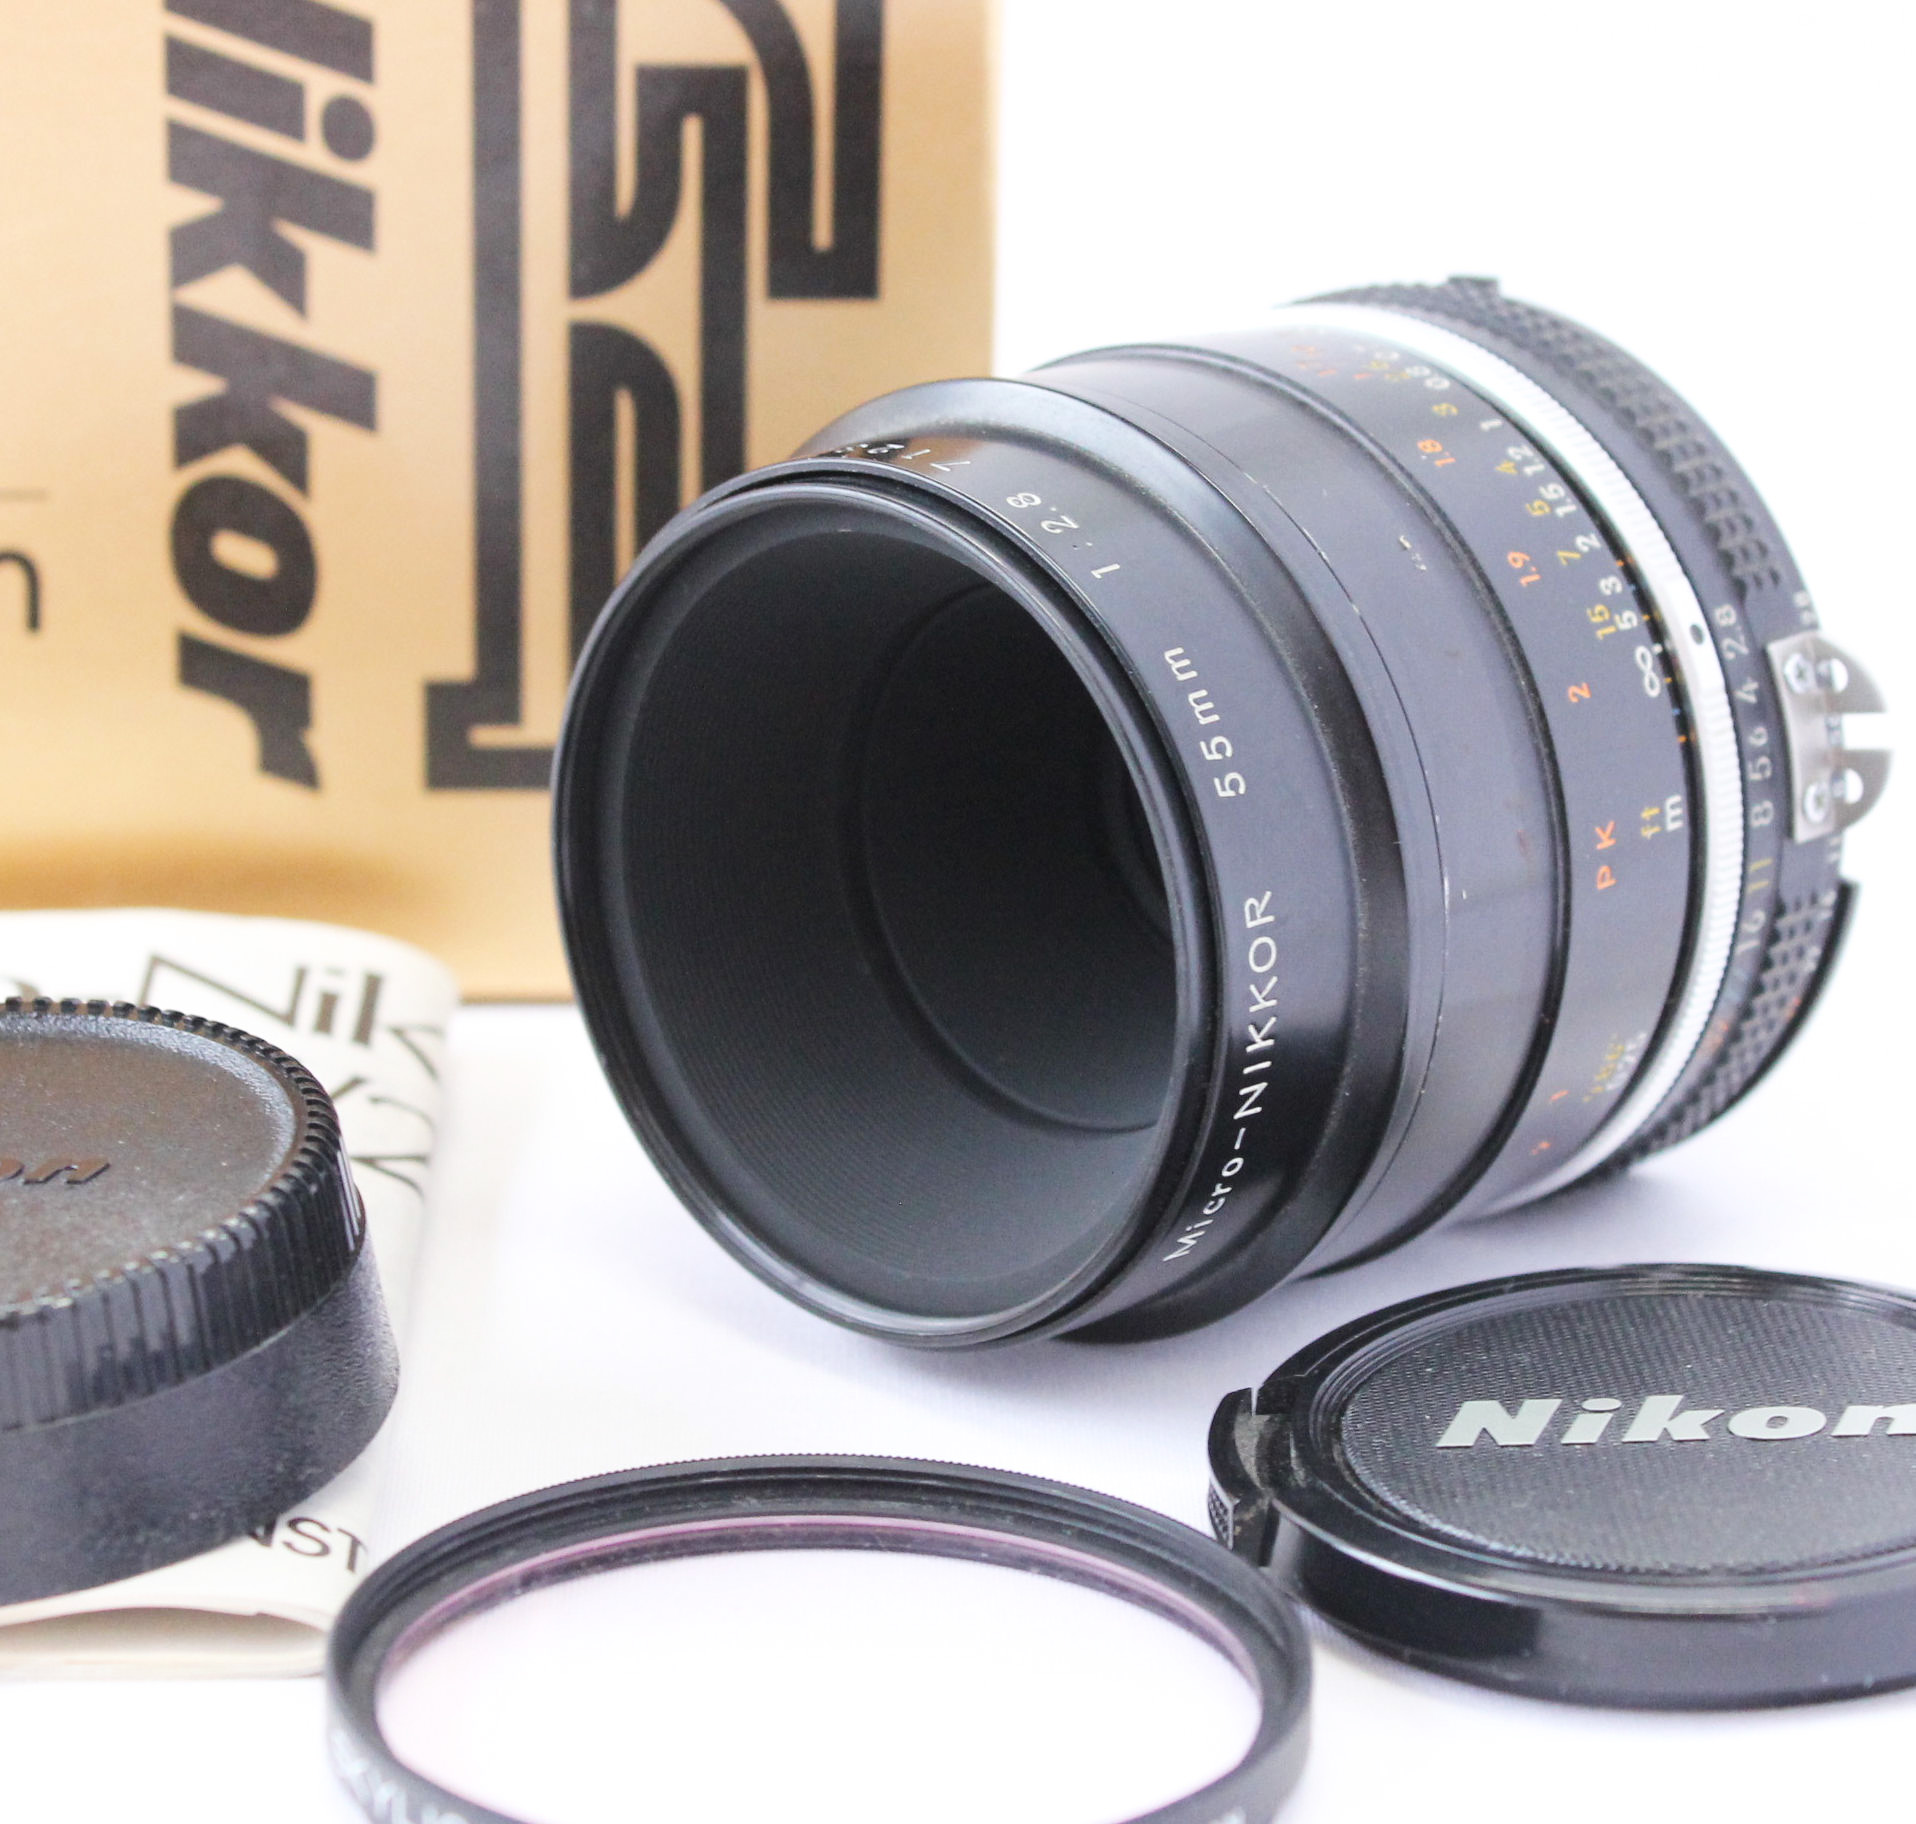 Japan Used Camera Shop | [Excellent+++++] Nikon Ai-s Micro-NIKKOR 55mm F2.8 MF Lens w/ Box & Filter from Japan